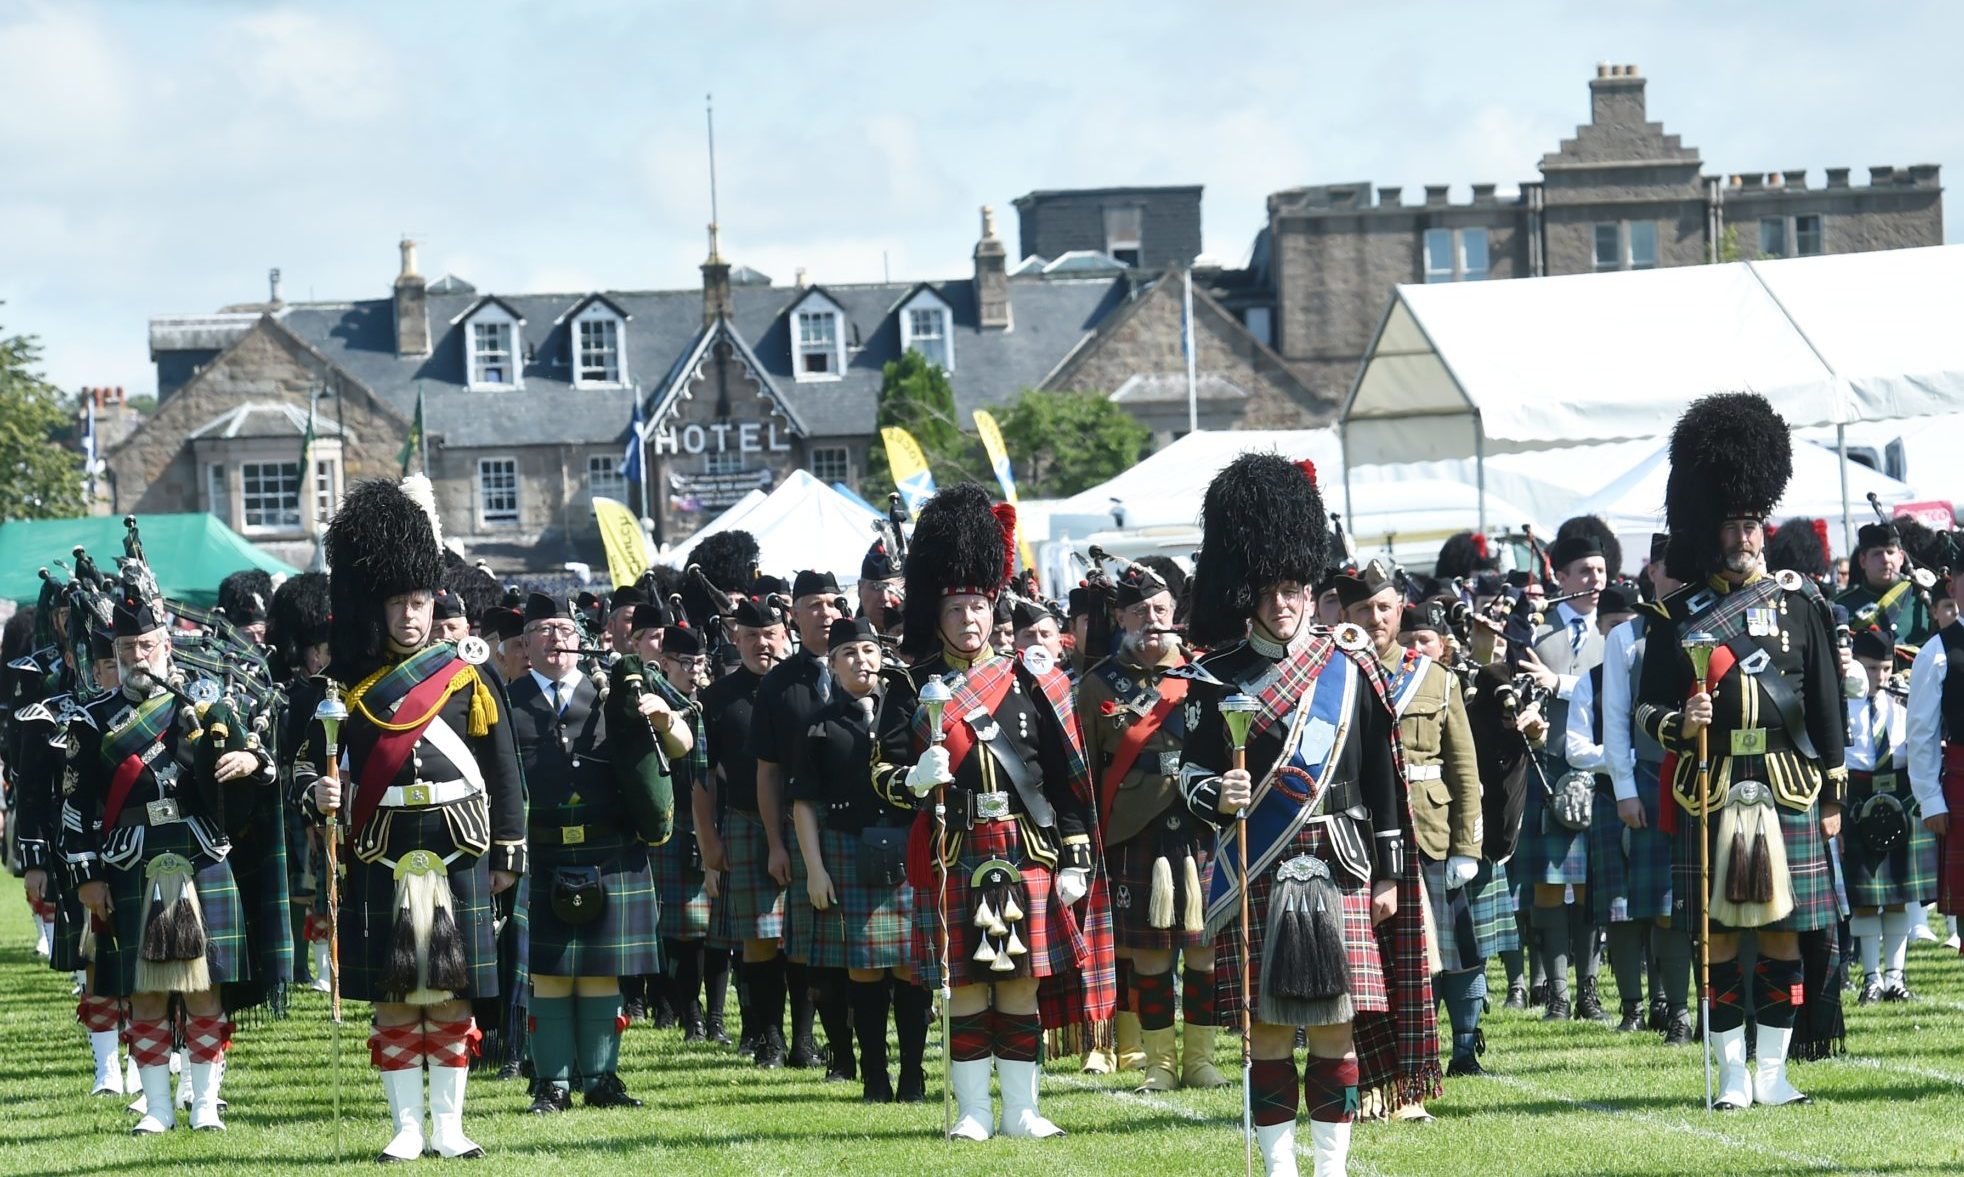 Pipe bands at the Aboyne Highland Games 2019, photograph by Colin Rennie